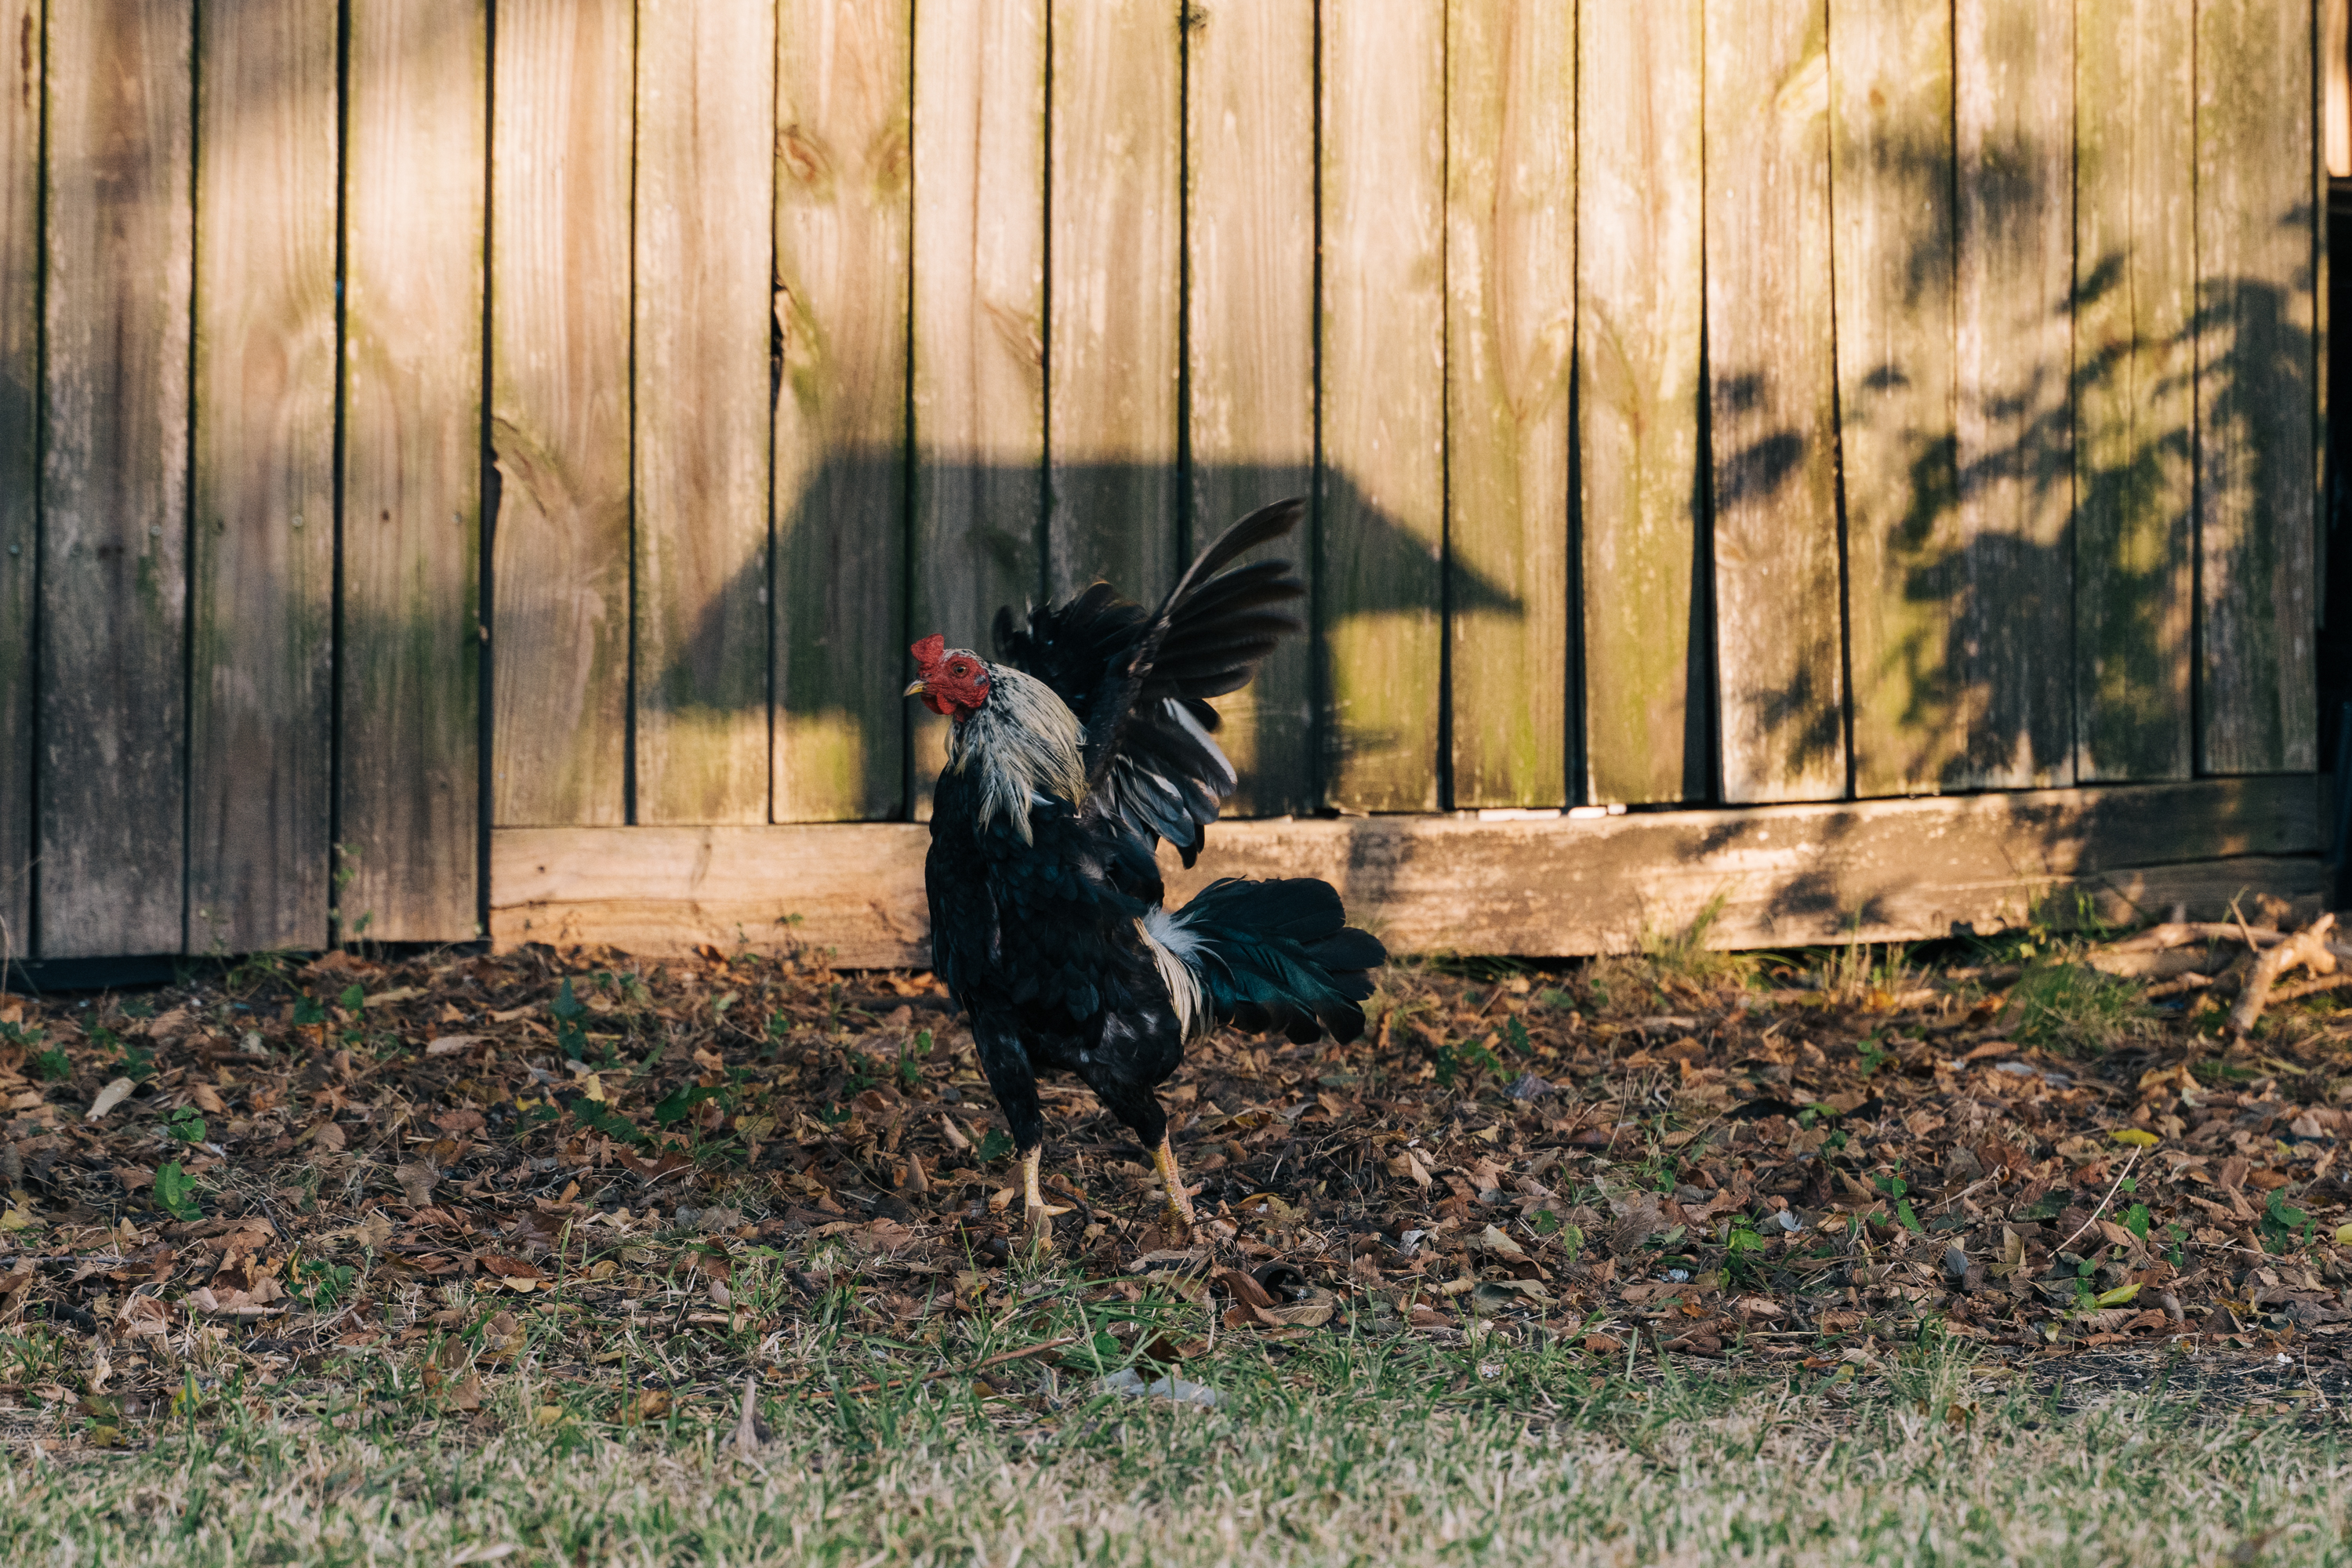 A rooster stretches its wings at a home garden